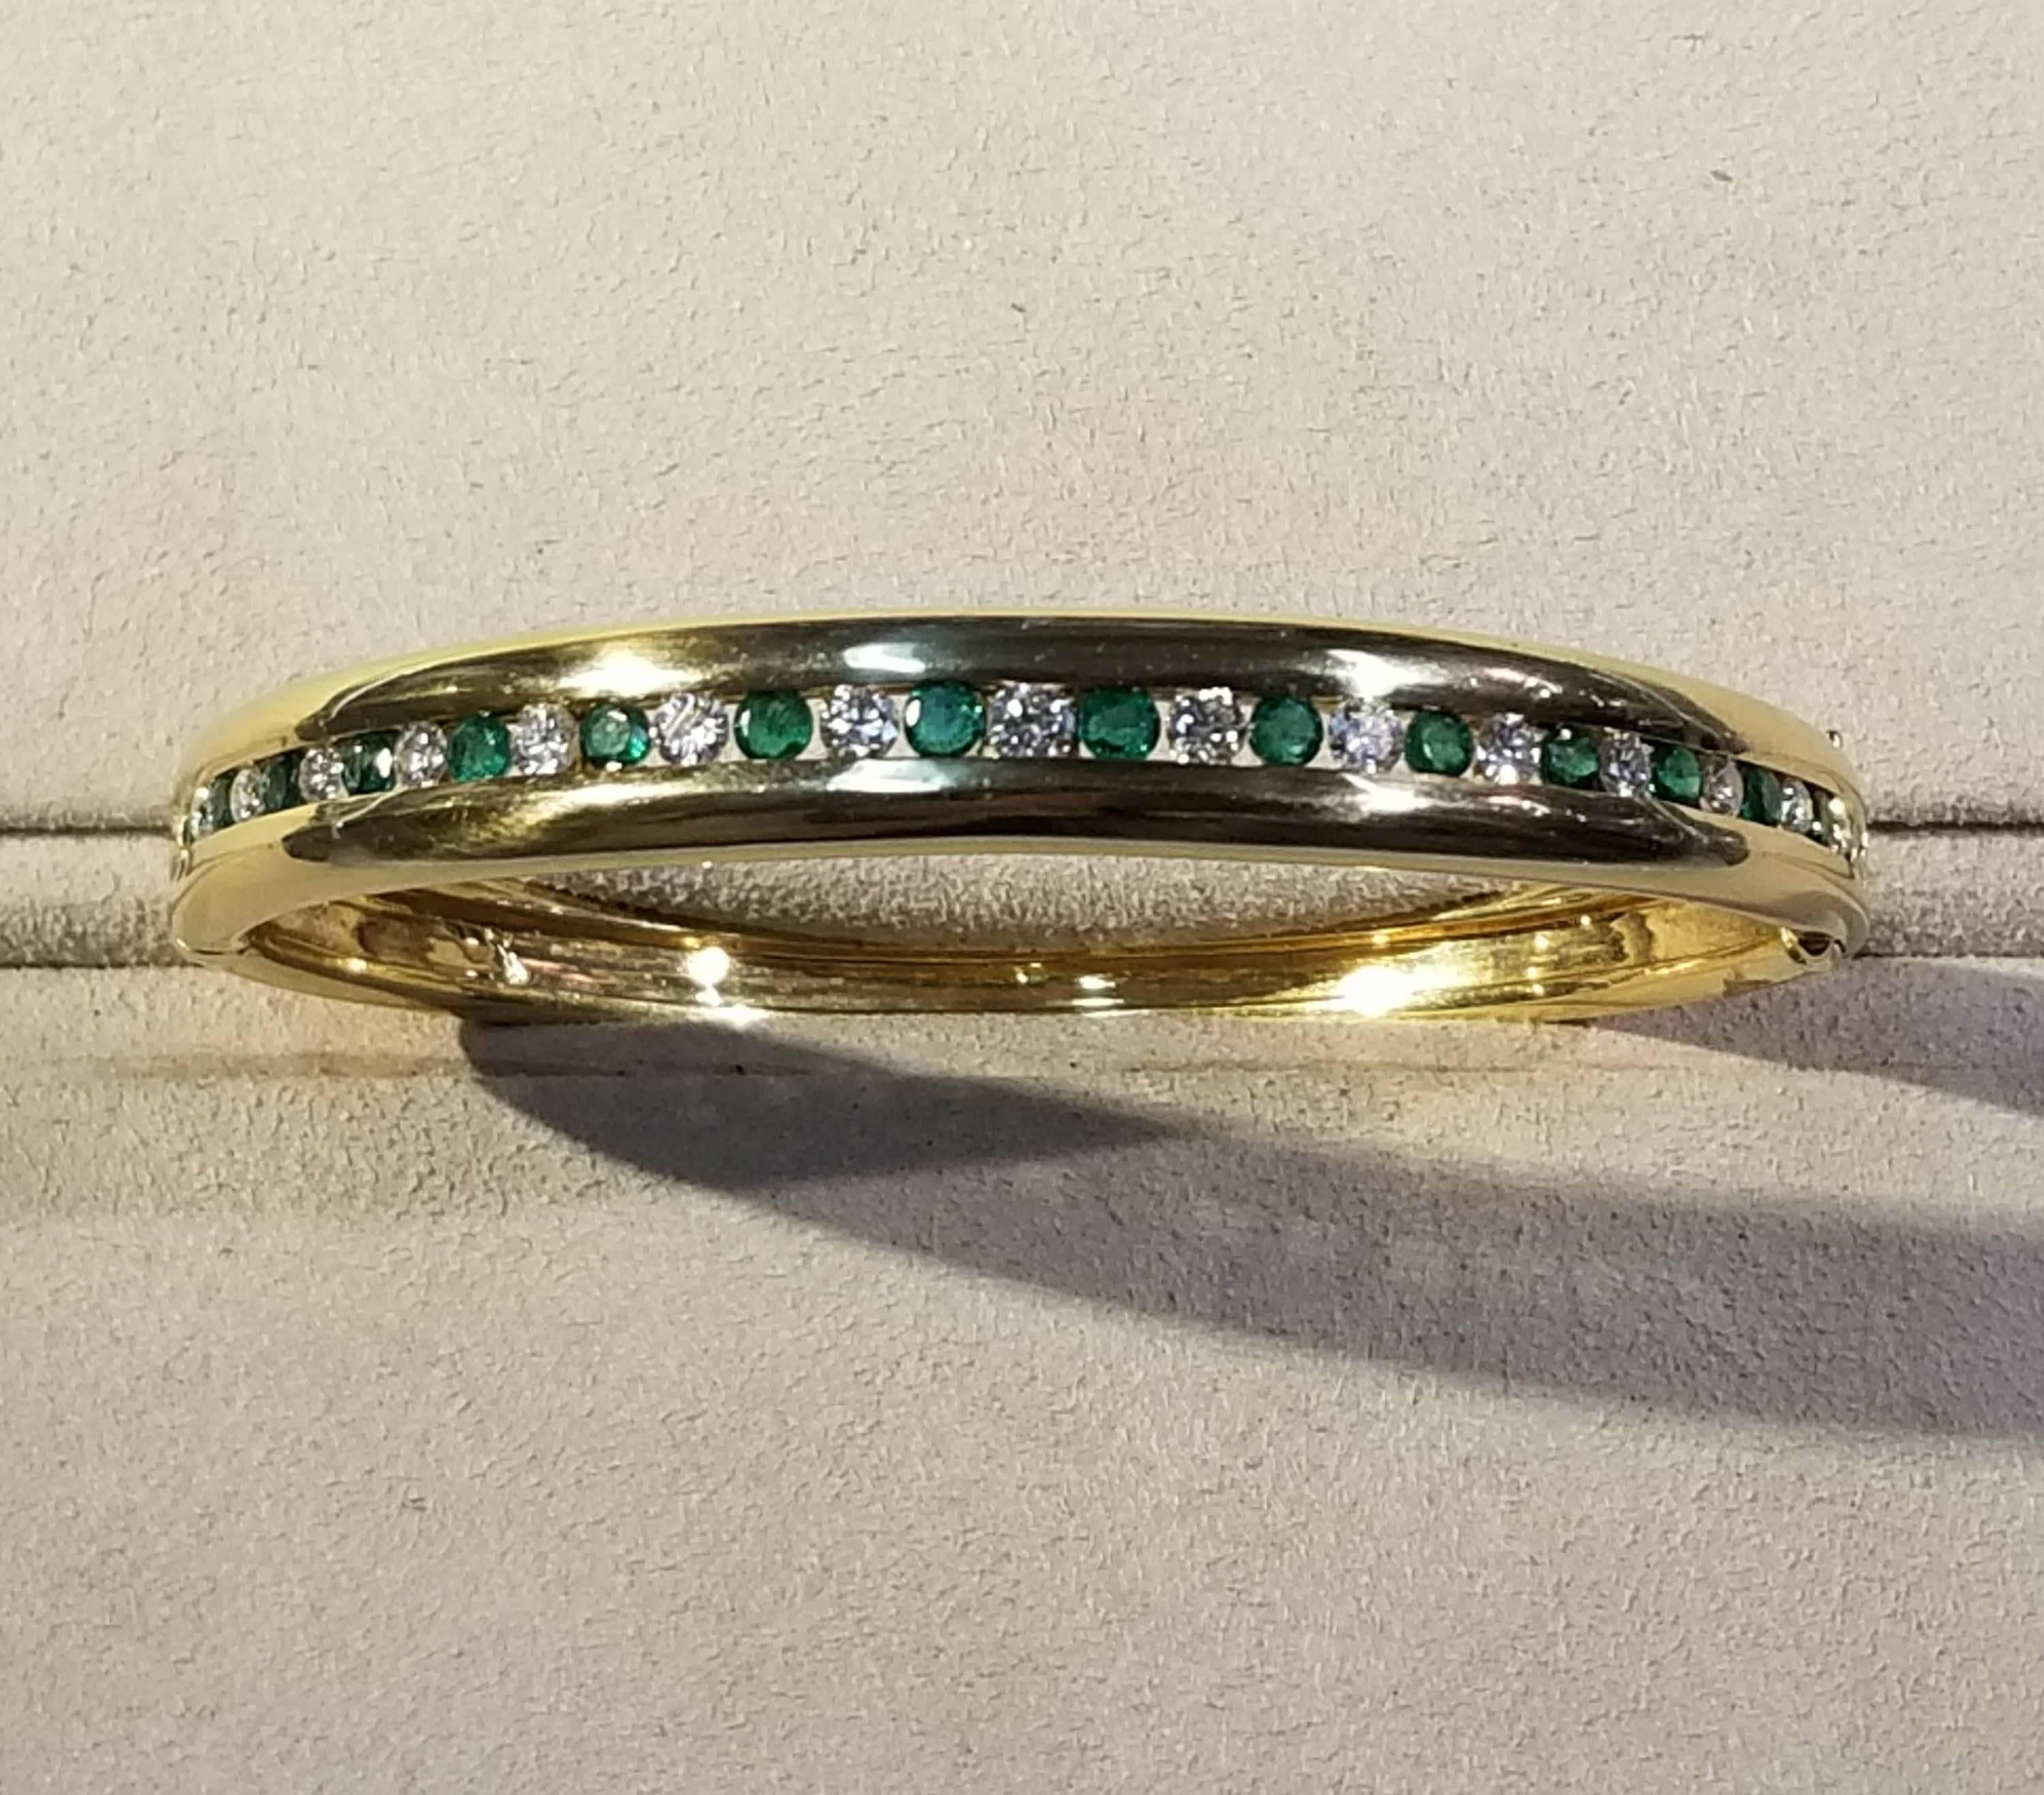 Bailey Banks and Biddle 18k y/g Emerald and Diamond Bracelet.
There are 15 Round Brilliant Diamonds that are GHI in color and SI/I in clarity. The actual total weight comes to 1 cts. There are 16 Round D Emeralds from Medium to Light Inclusions in